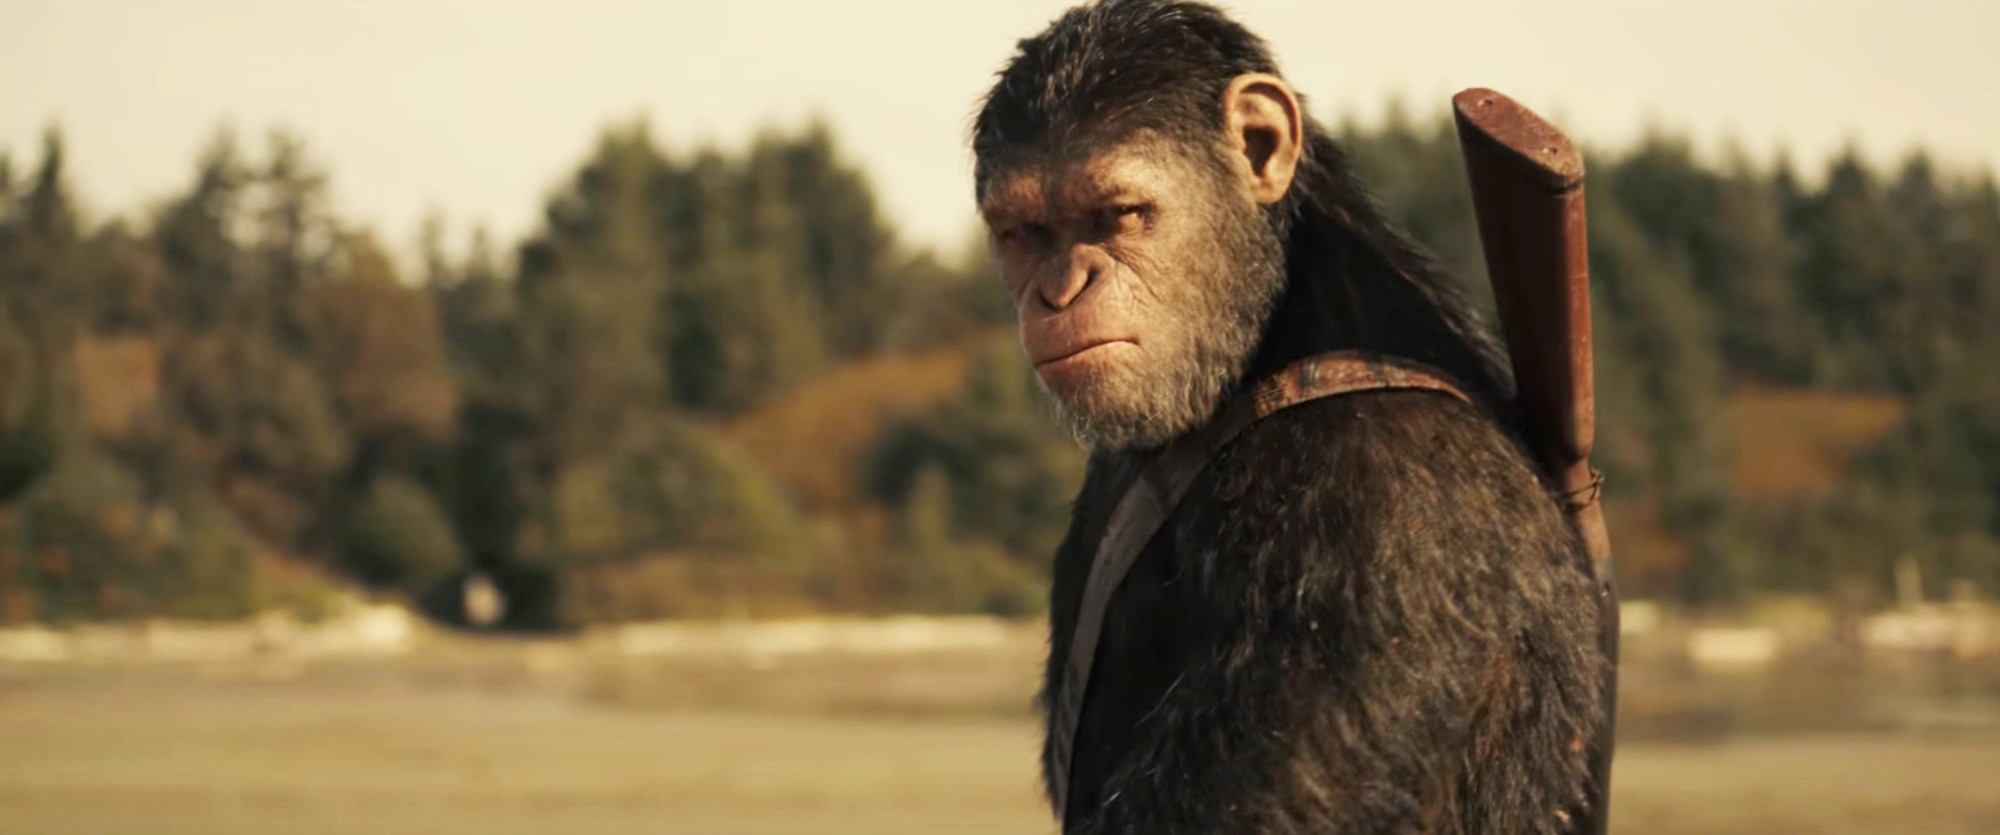 Caesar from 20th Century Fox's War for the Planet of the Apes (2017)